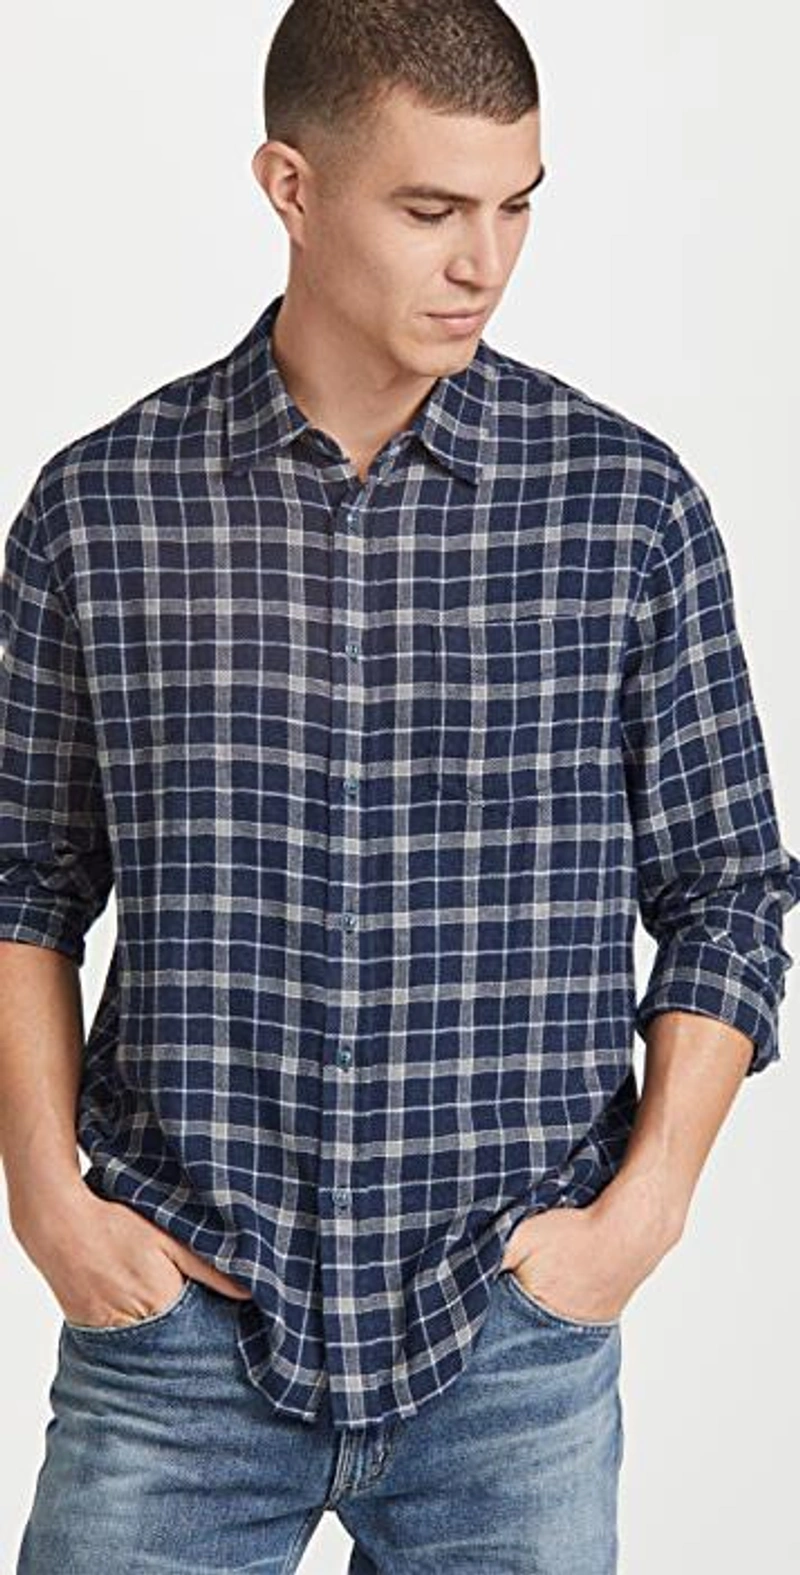 shopbop.com's Posts | 搭配: Citizens Of Humanity Bowery Standard Slim Jeans In Colorado；Rails Brushed Lennox Plaid Flannel Button-up Shirt In Indigo Gray；Converse Chuck 70 Easy Breezy Low-top Sneakers